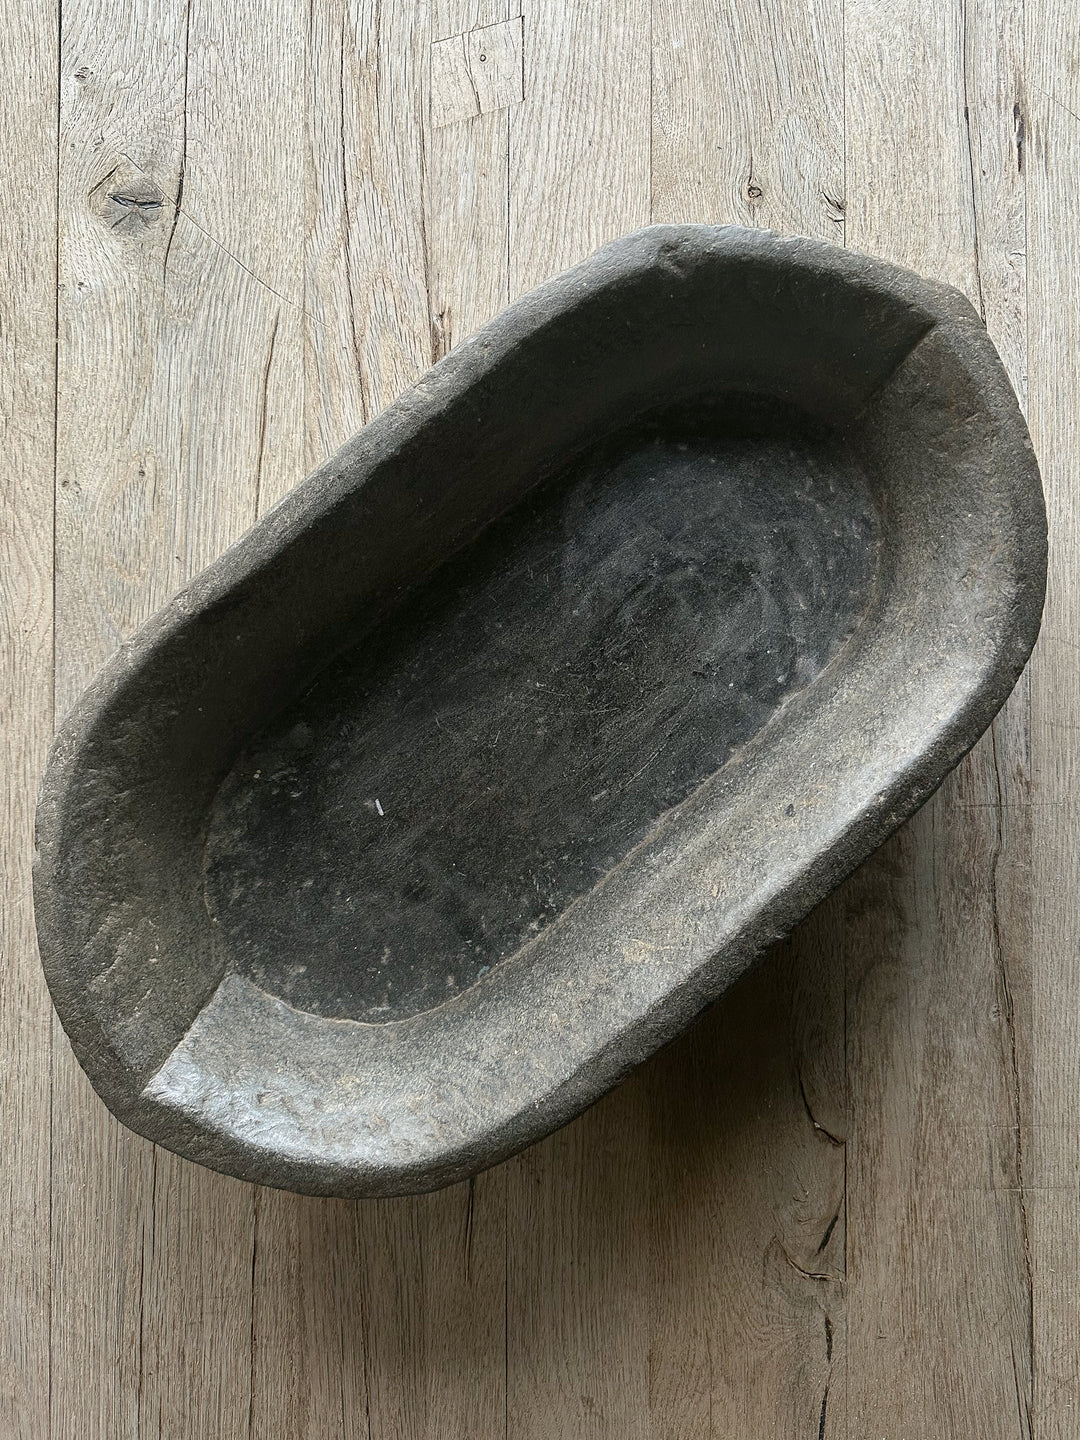 Antiqued Handcrafted Stone Bowl